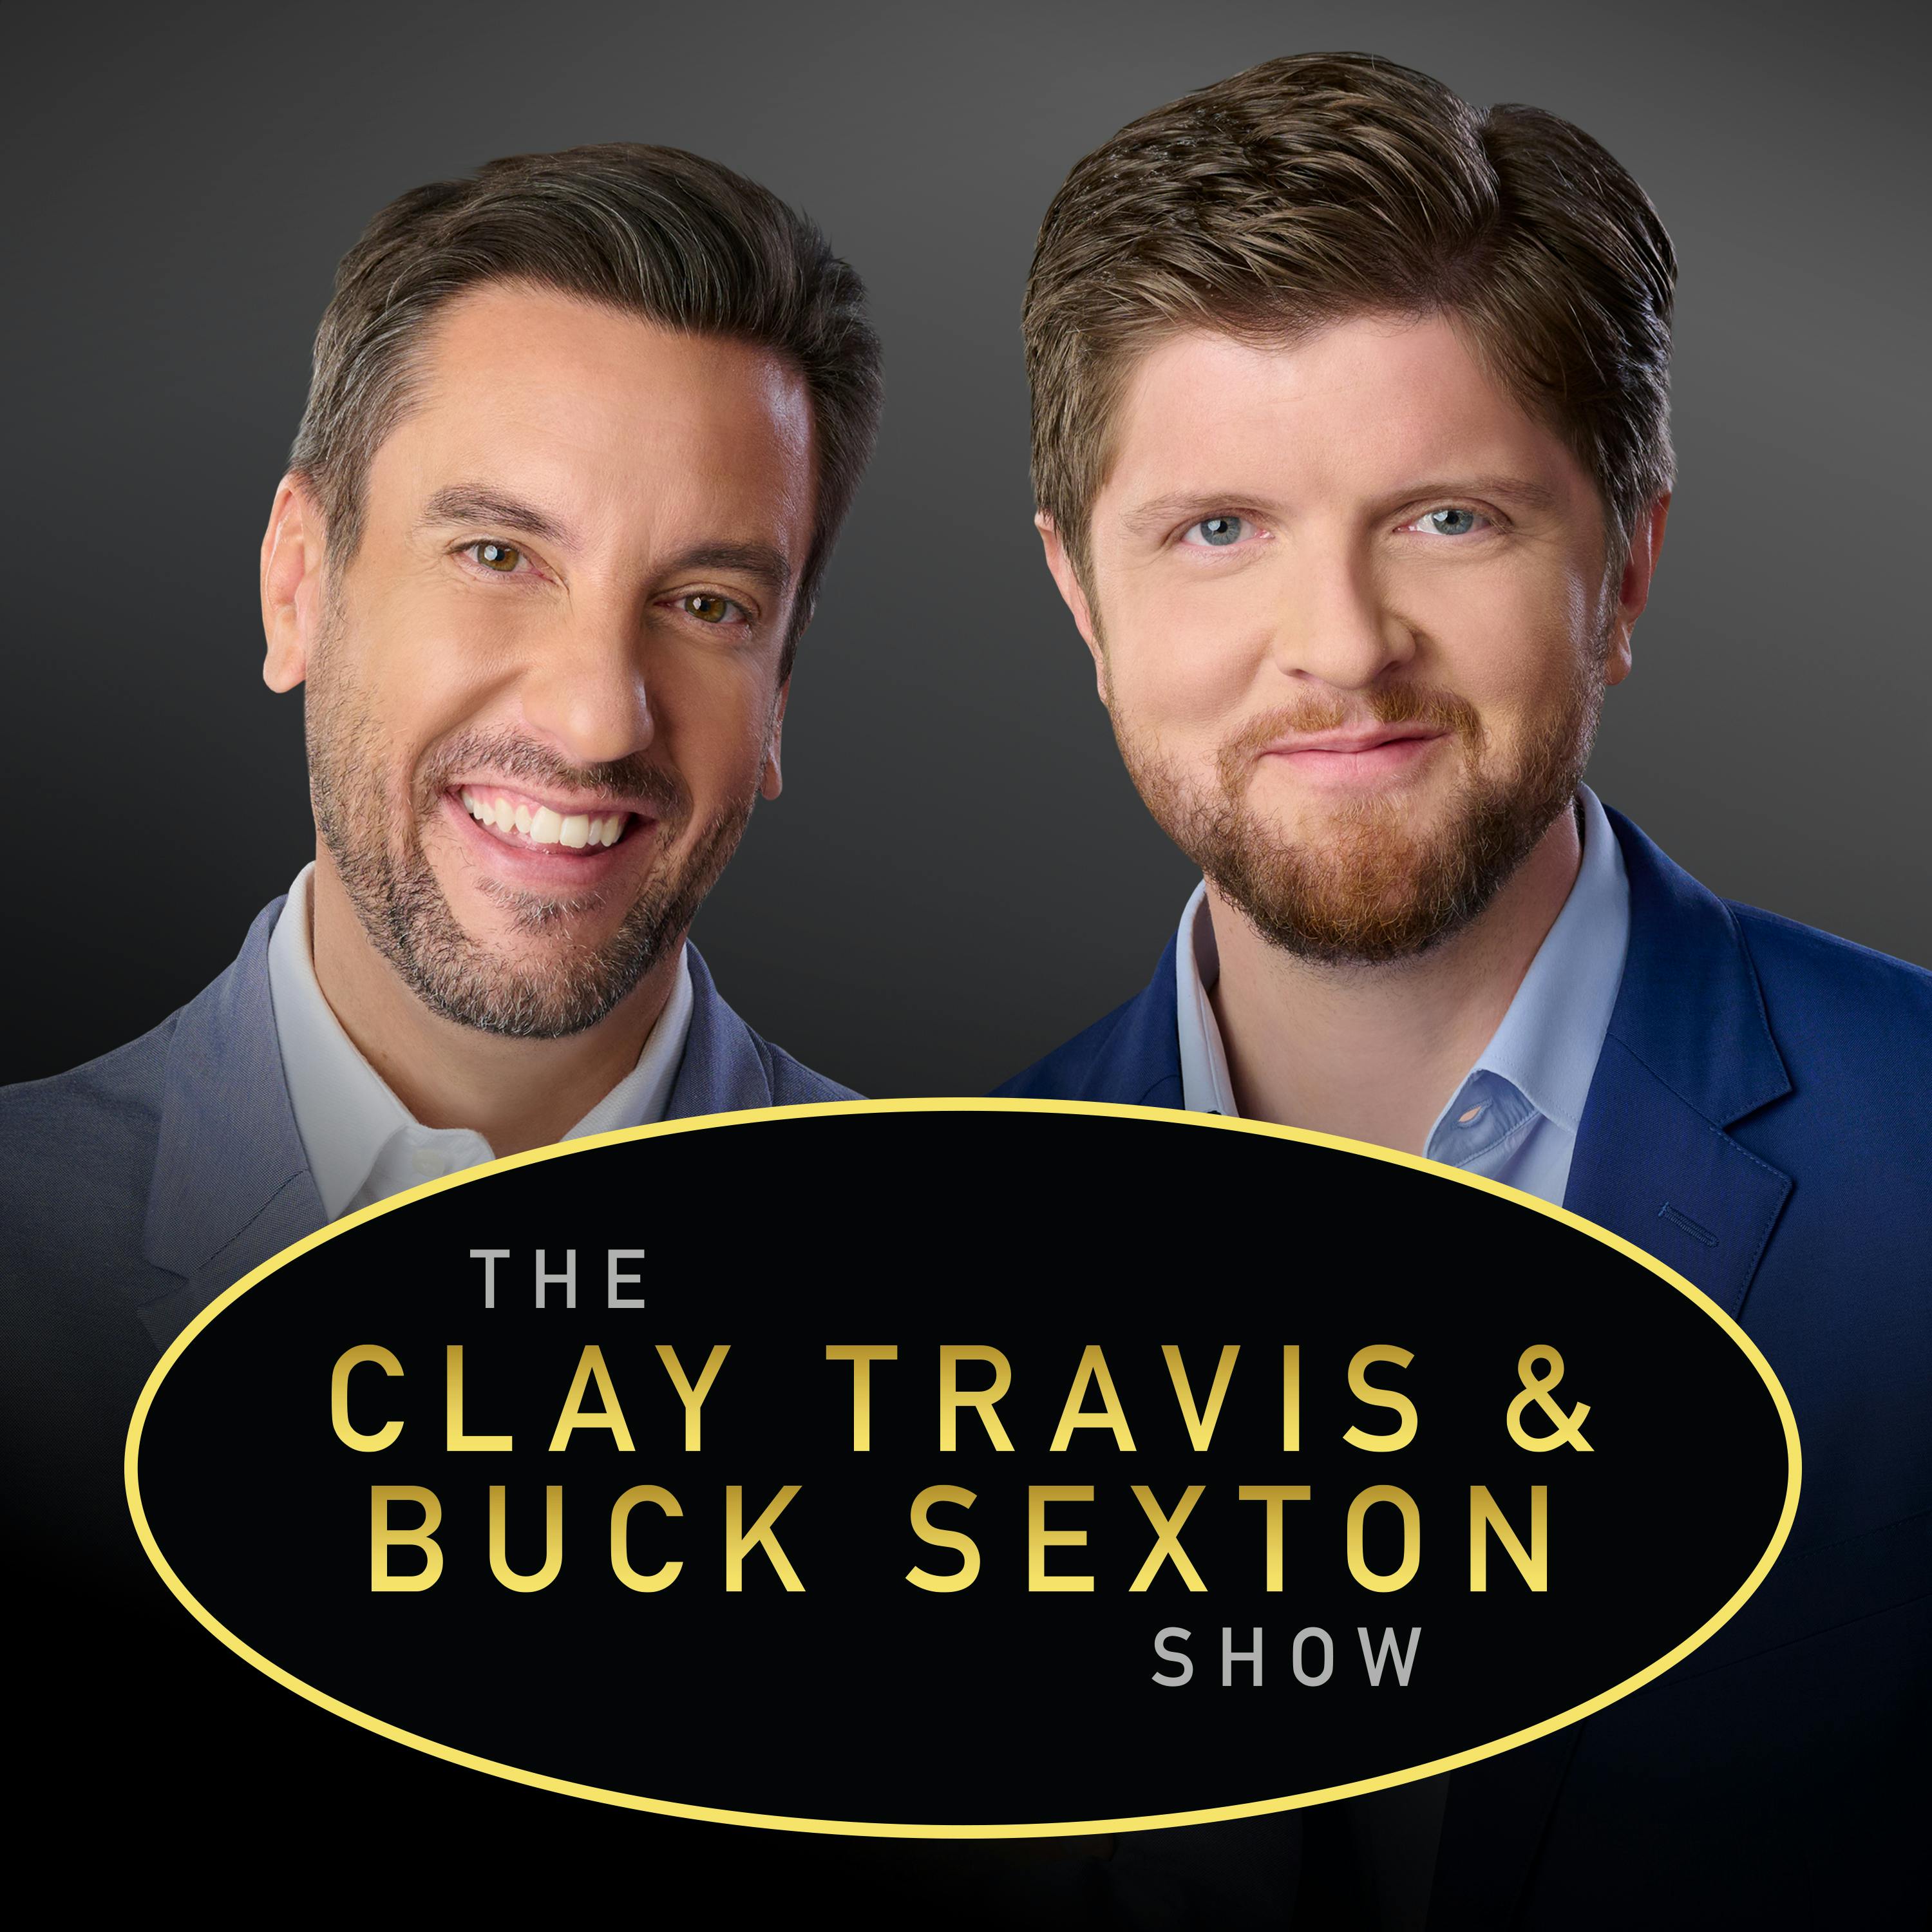 Clay Travis and Buck Sexton Show H2 – Jan 20 2022